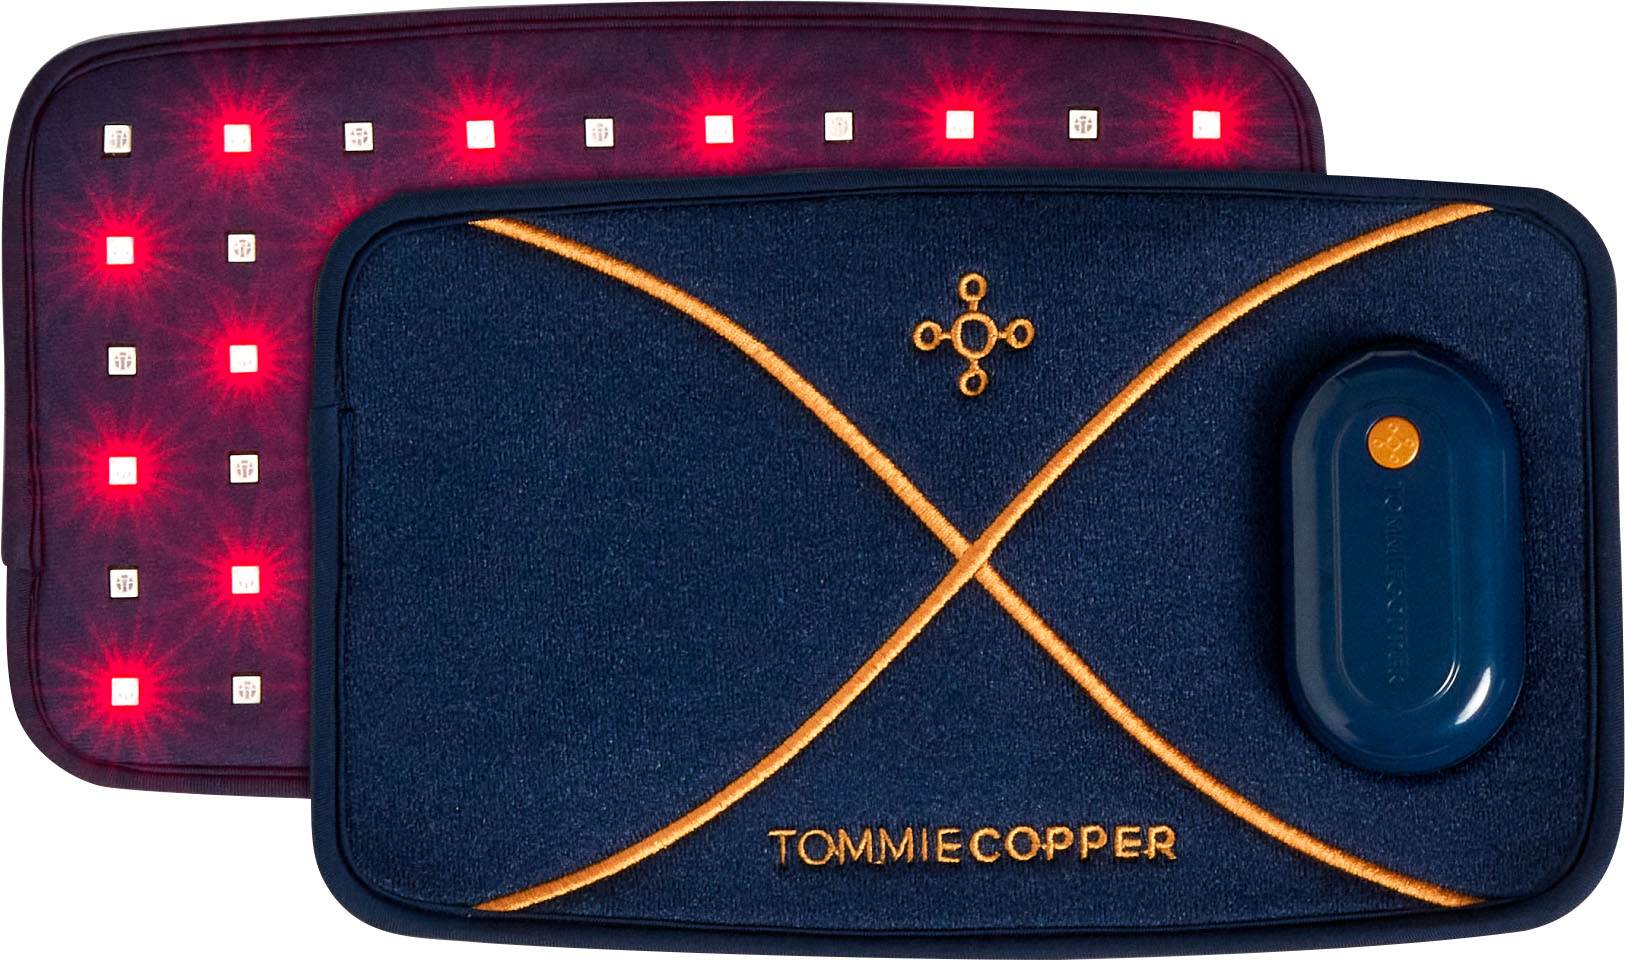 Best Buy: Tommie Copper Infrared Light Therapy Flex Pad Dark Navy 5007LD